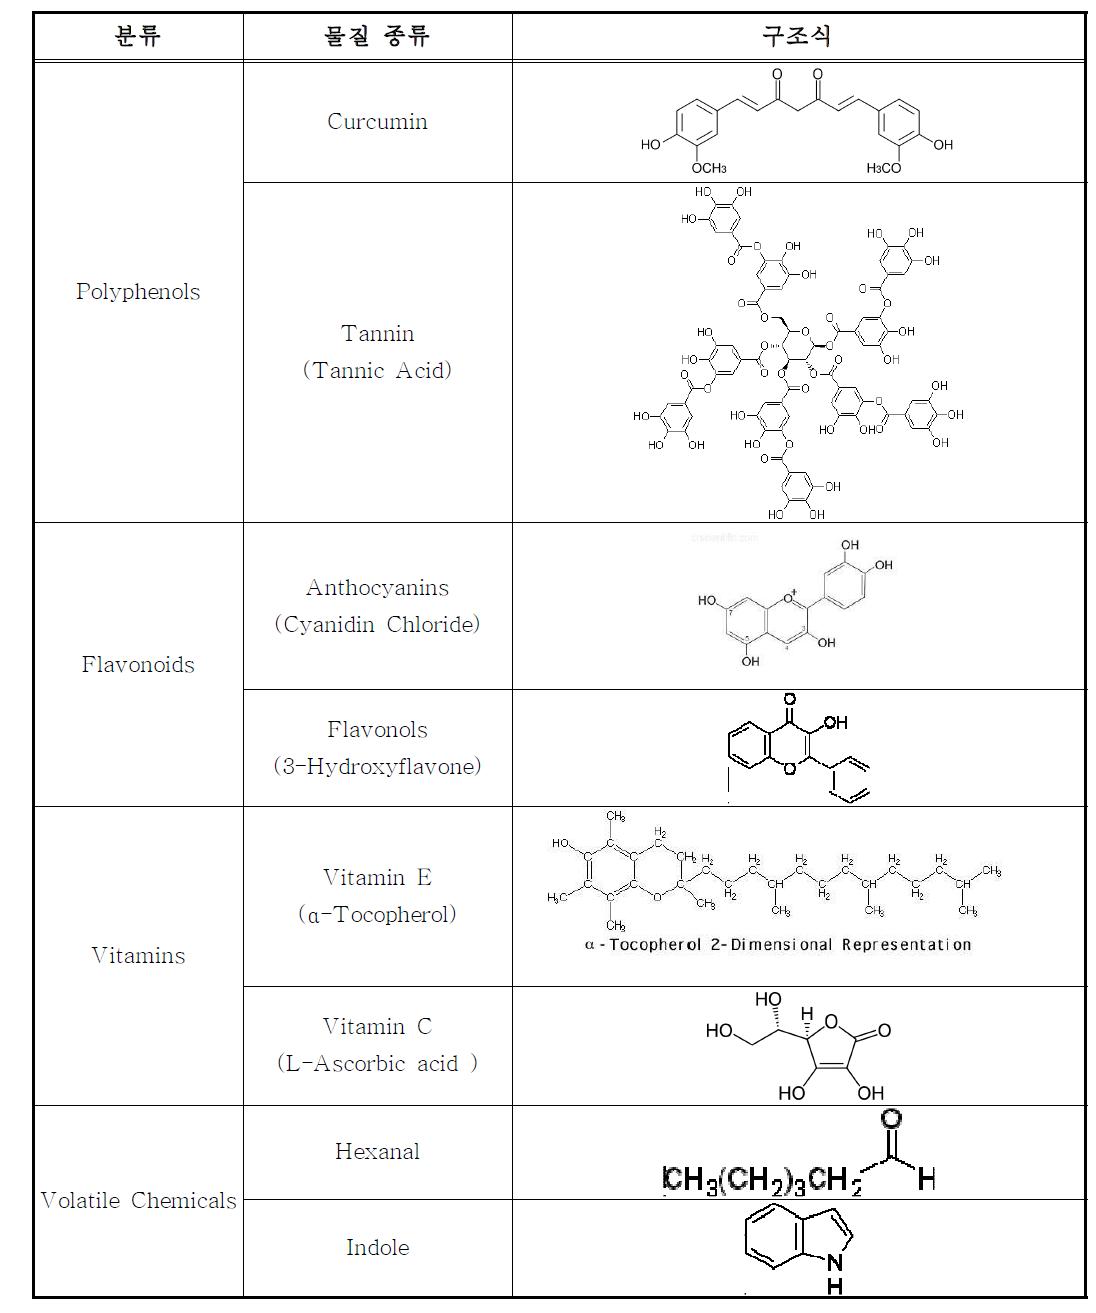 Chemical Structures of Selected Antioxidants